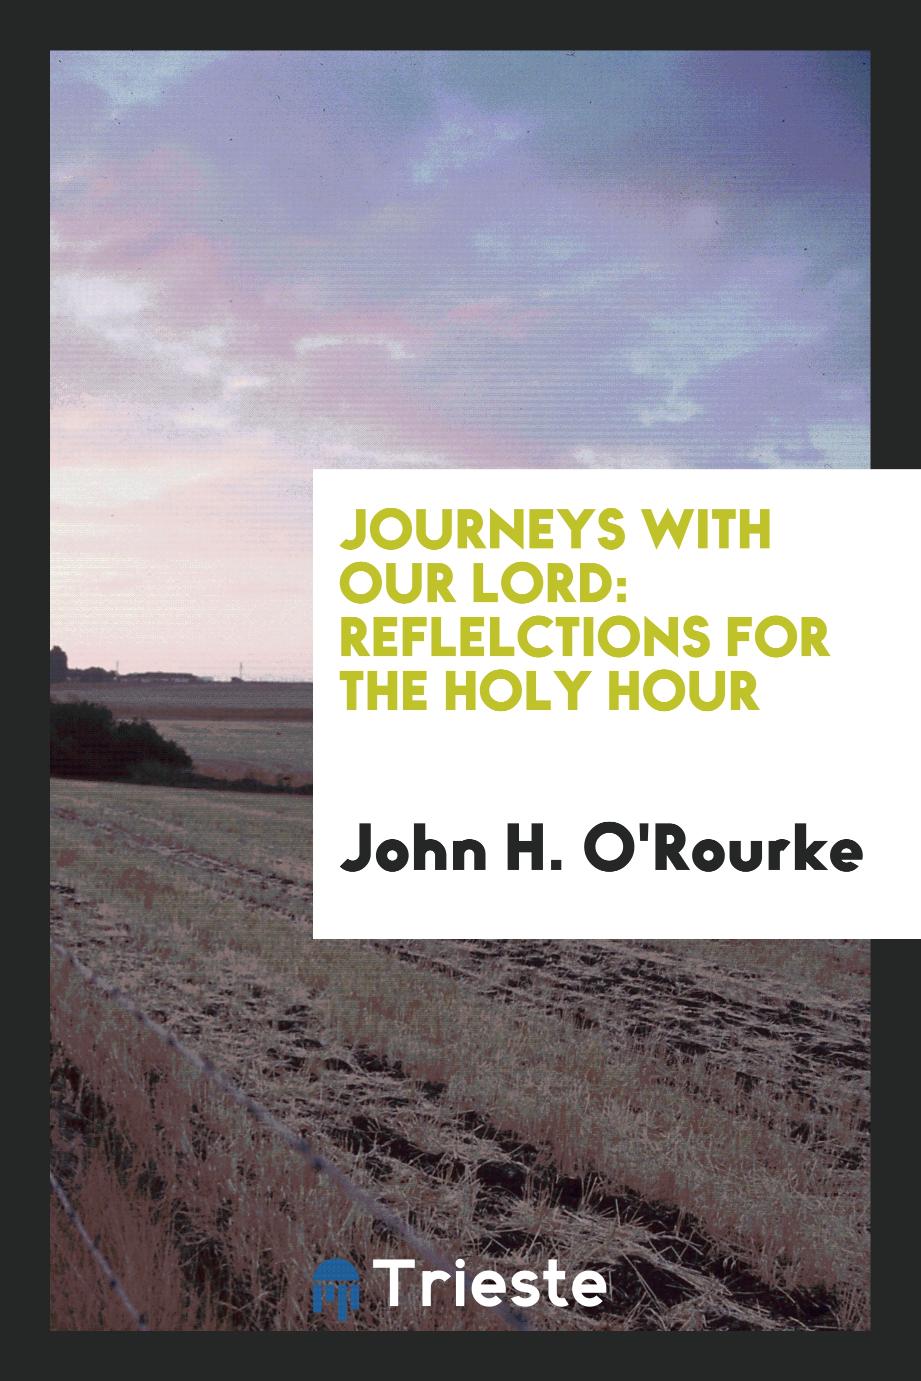 Journeys with Our Lord: reflelctions for the Holy Hour